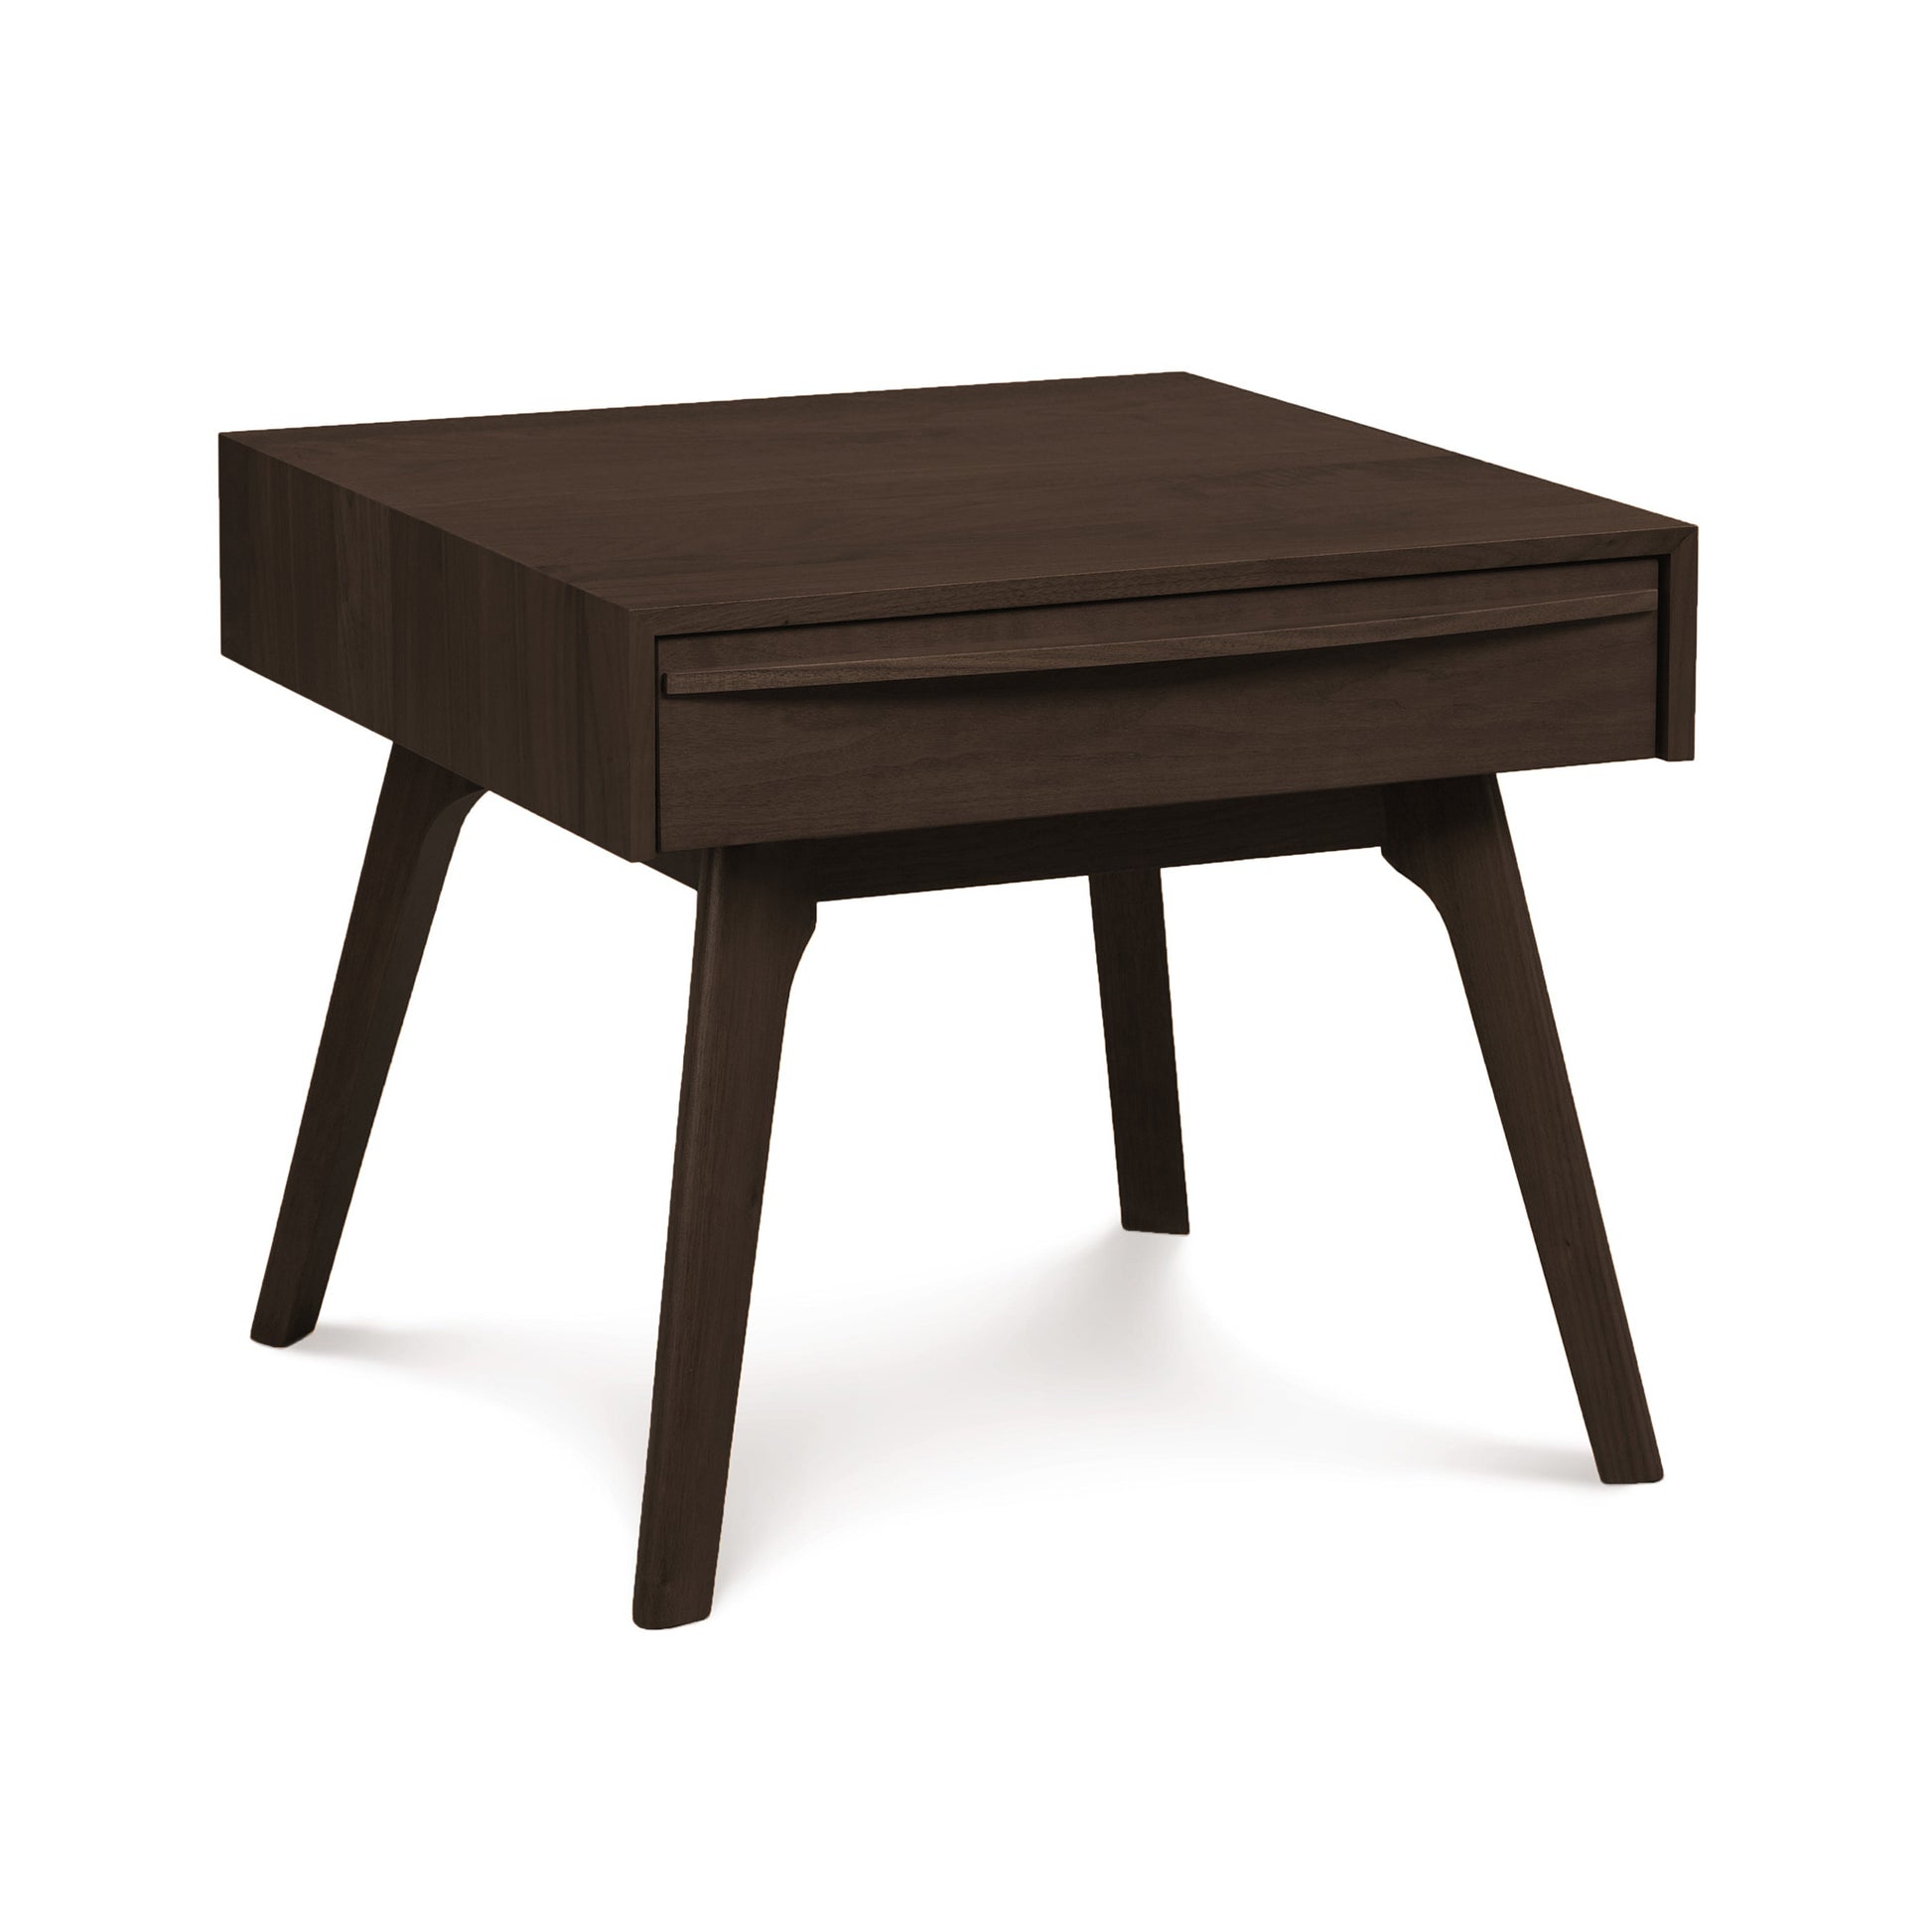 A modern dark brown Copeland Furniture Catalina 1-Drawer Nightstand with angled legs.